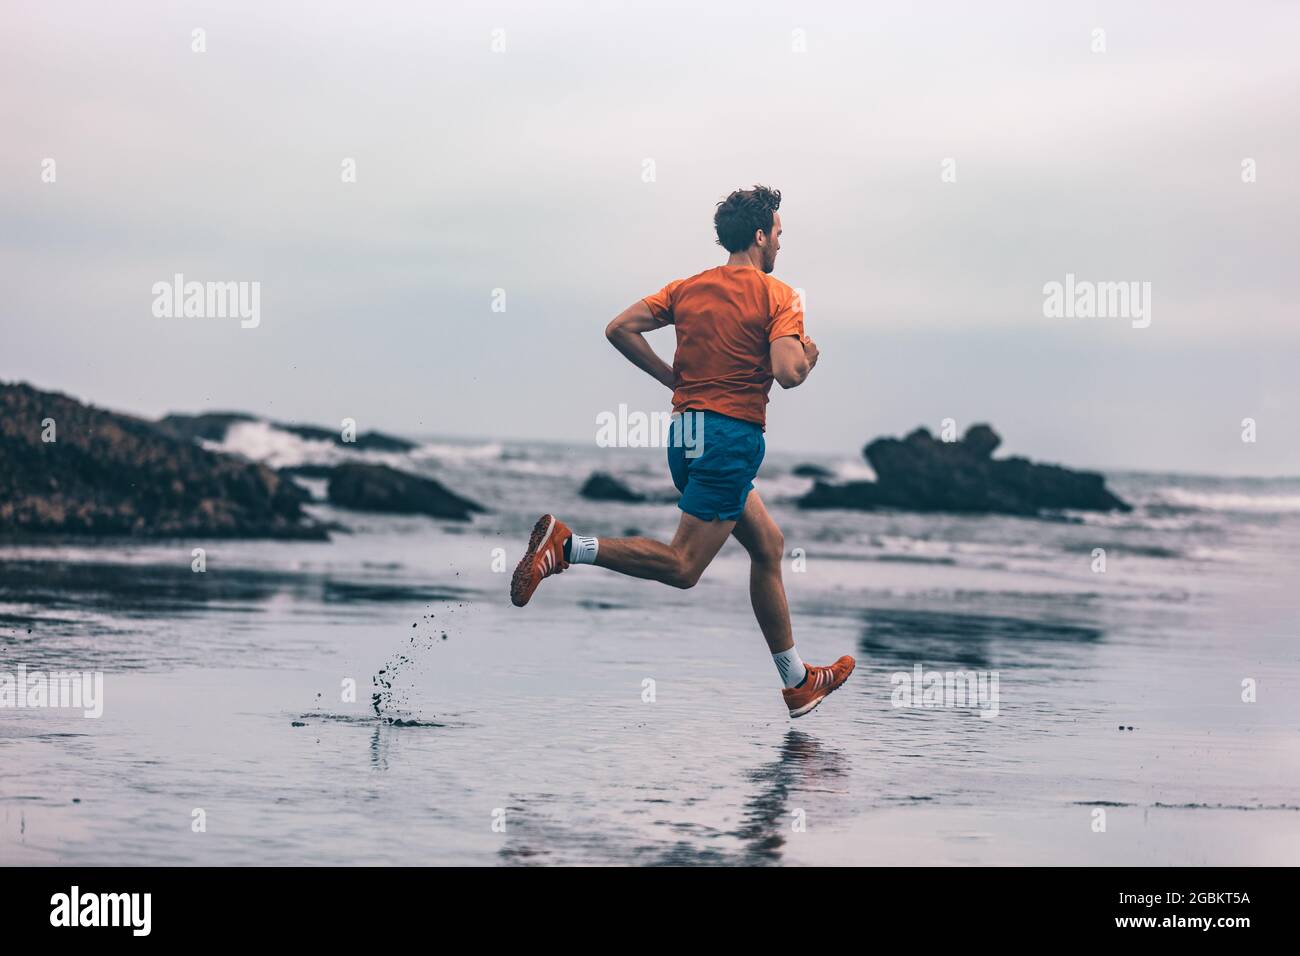 Exercise outdoor athlete man running on wet sand at beach training cardio  sprinting fast. Profile of runner in sportswear clothes jogging Stock Photo  - Alamy